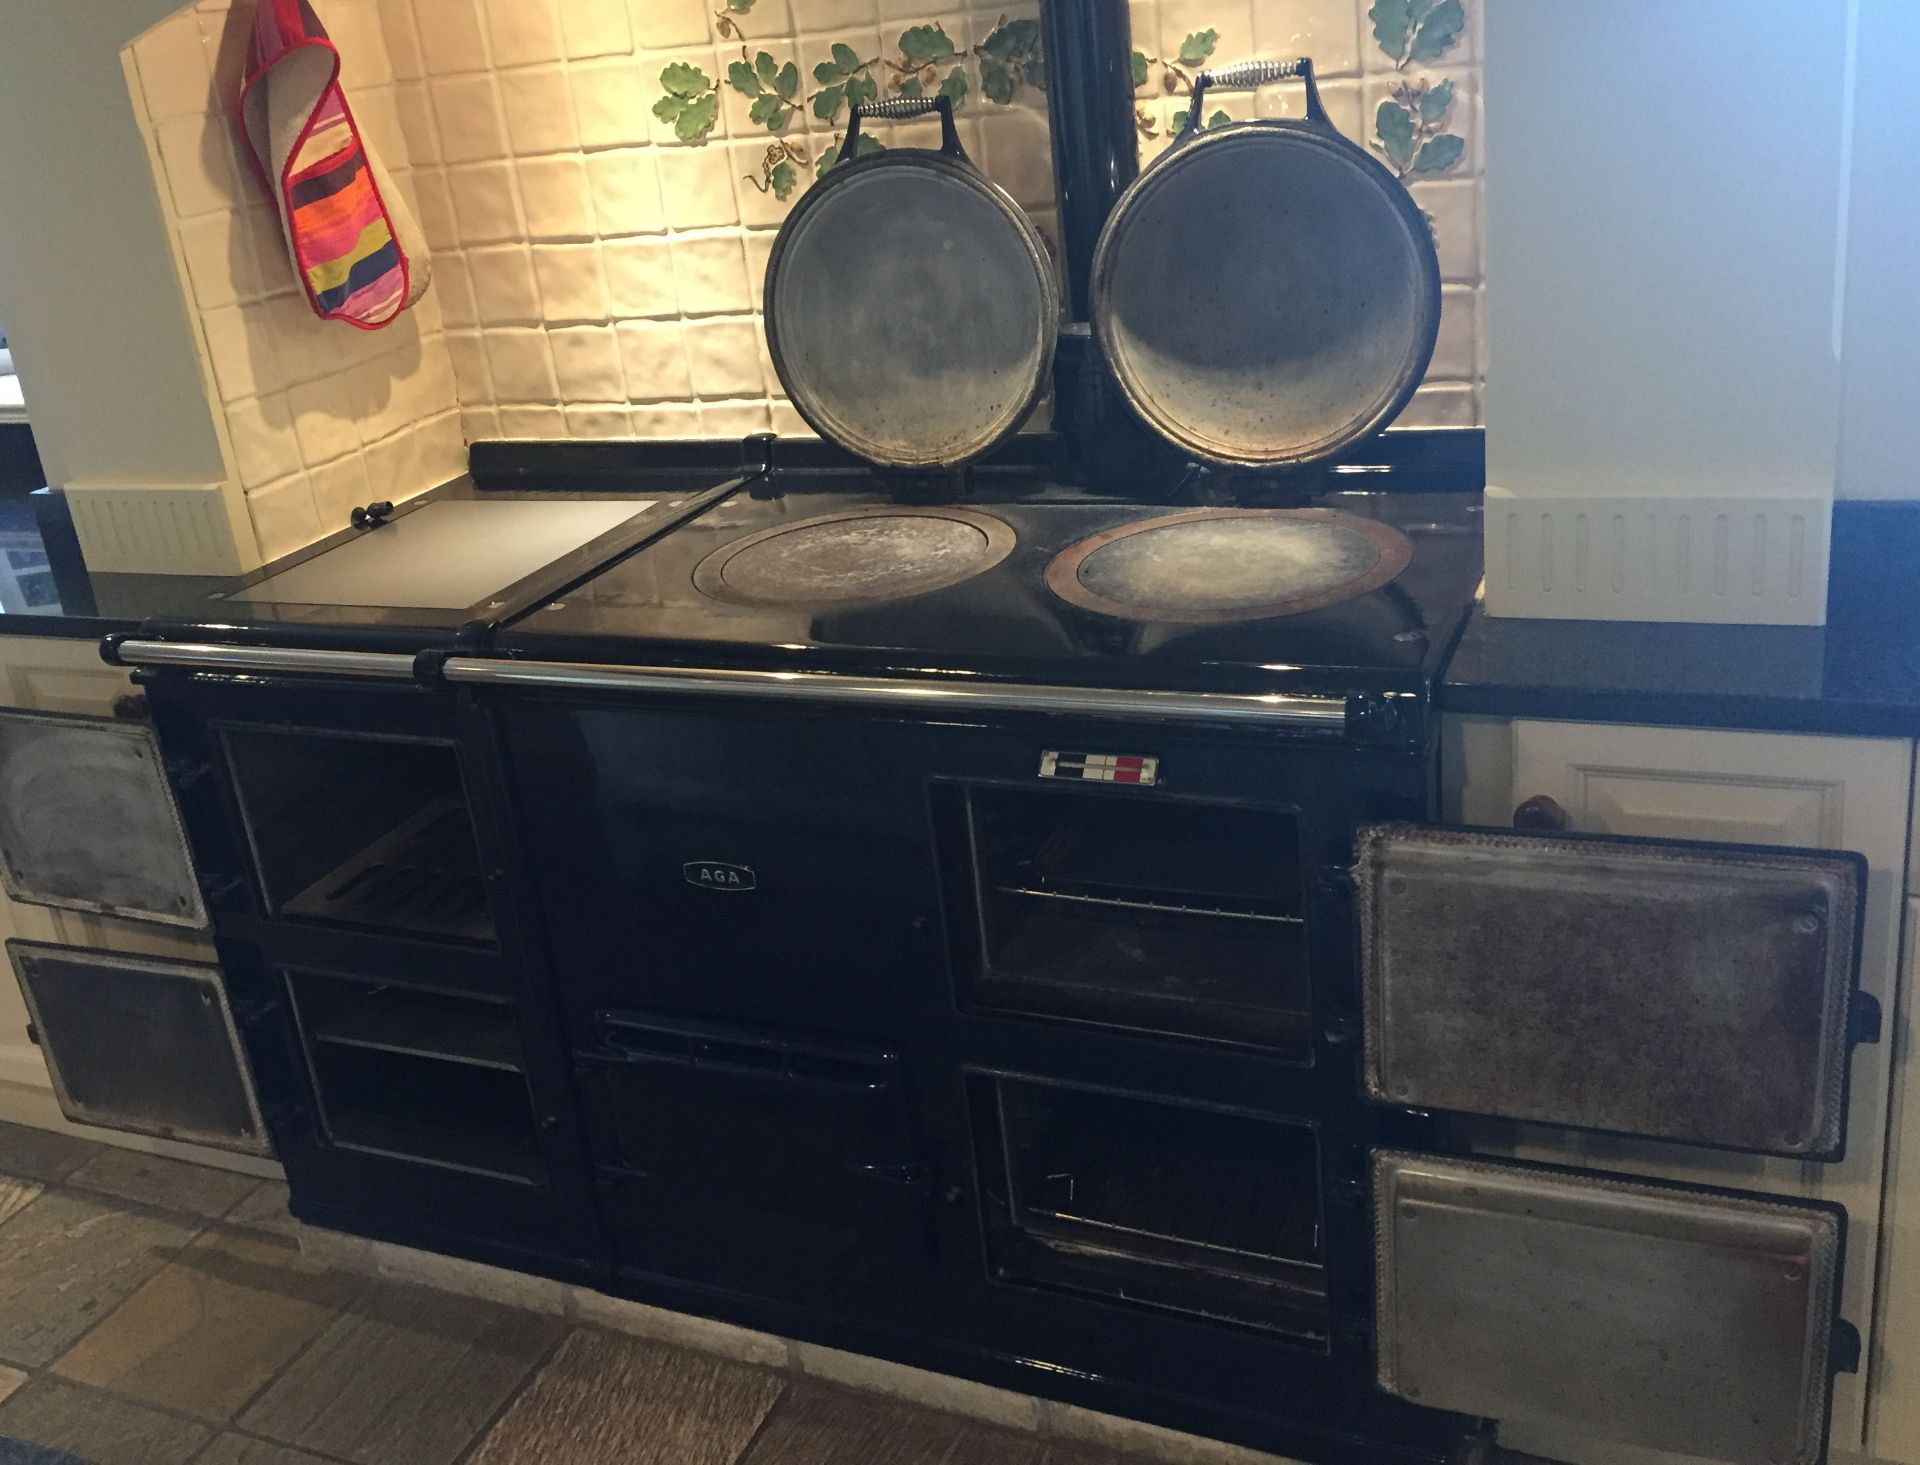 1 x Aga 4-Oven, 3-Plate Dual-Fuel Range Cooker - Cast Iron With Navy Enamel Finish With A Black - Image 18 of 21